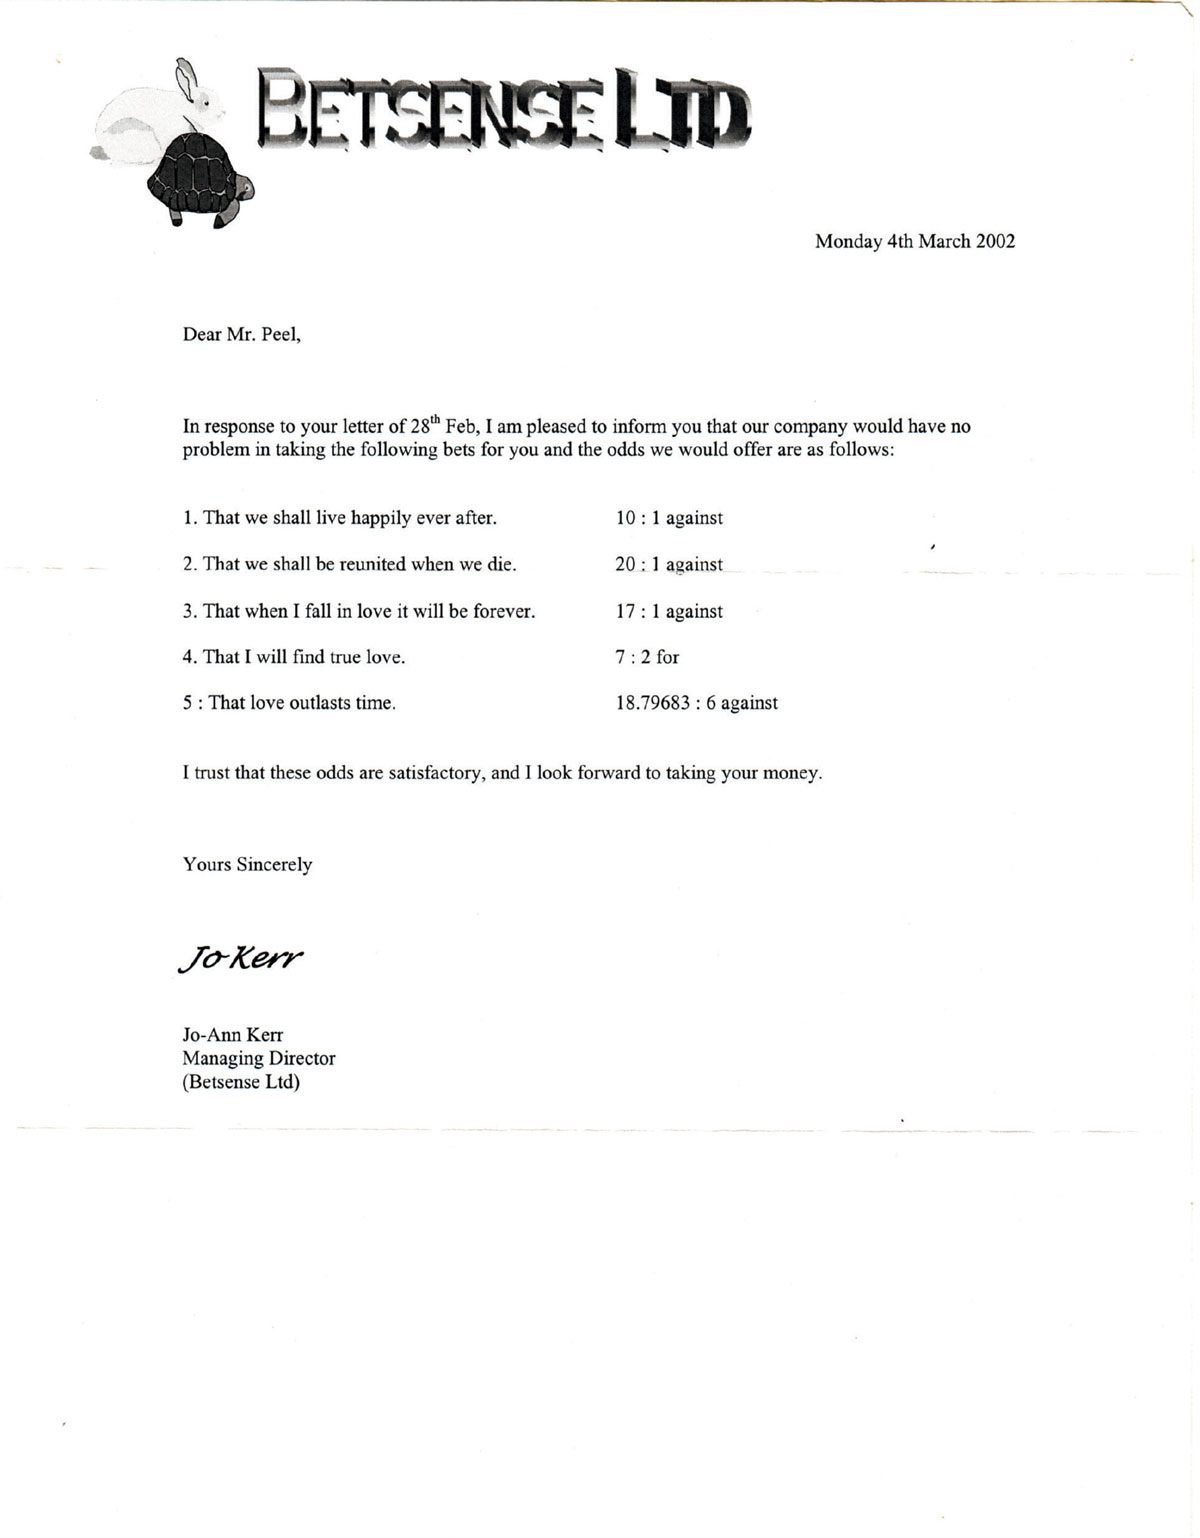 A letter addressed to James Peel from Betsense Limited, dated March 2002. The company writes to offer odds on various propositions including “That we shall live happily ever after 10 to 1 against” and “That i will find true love, 7 to 2 for.”